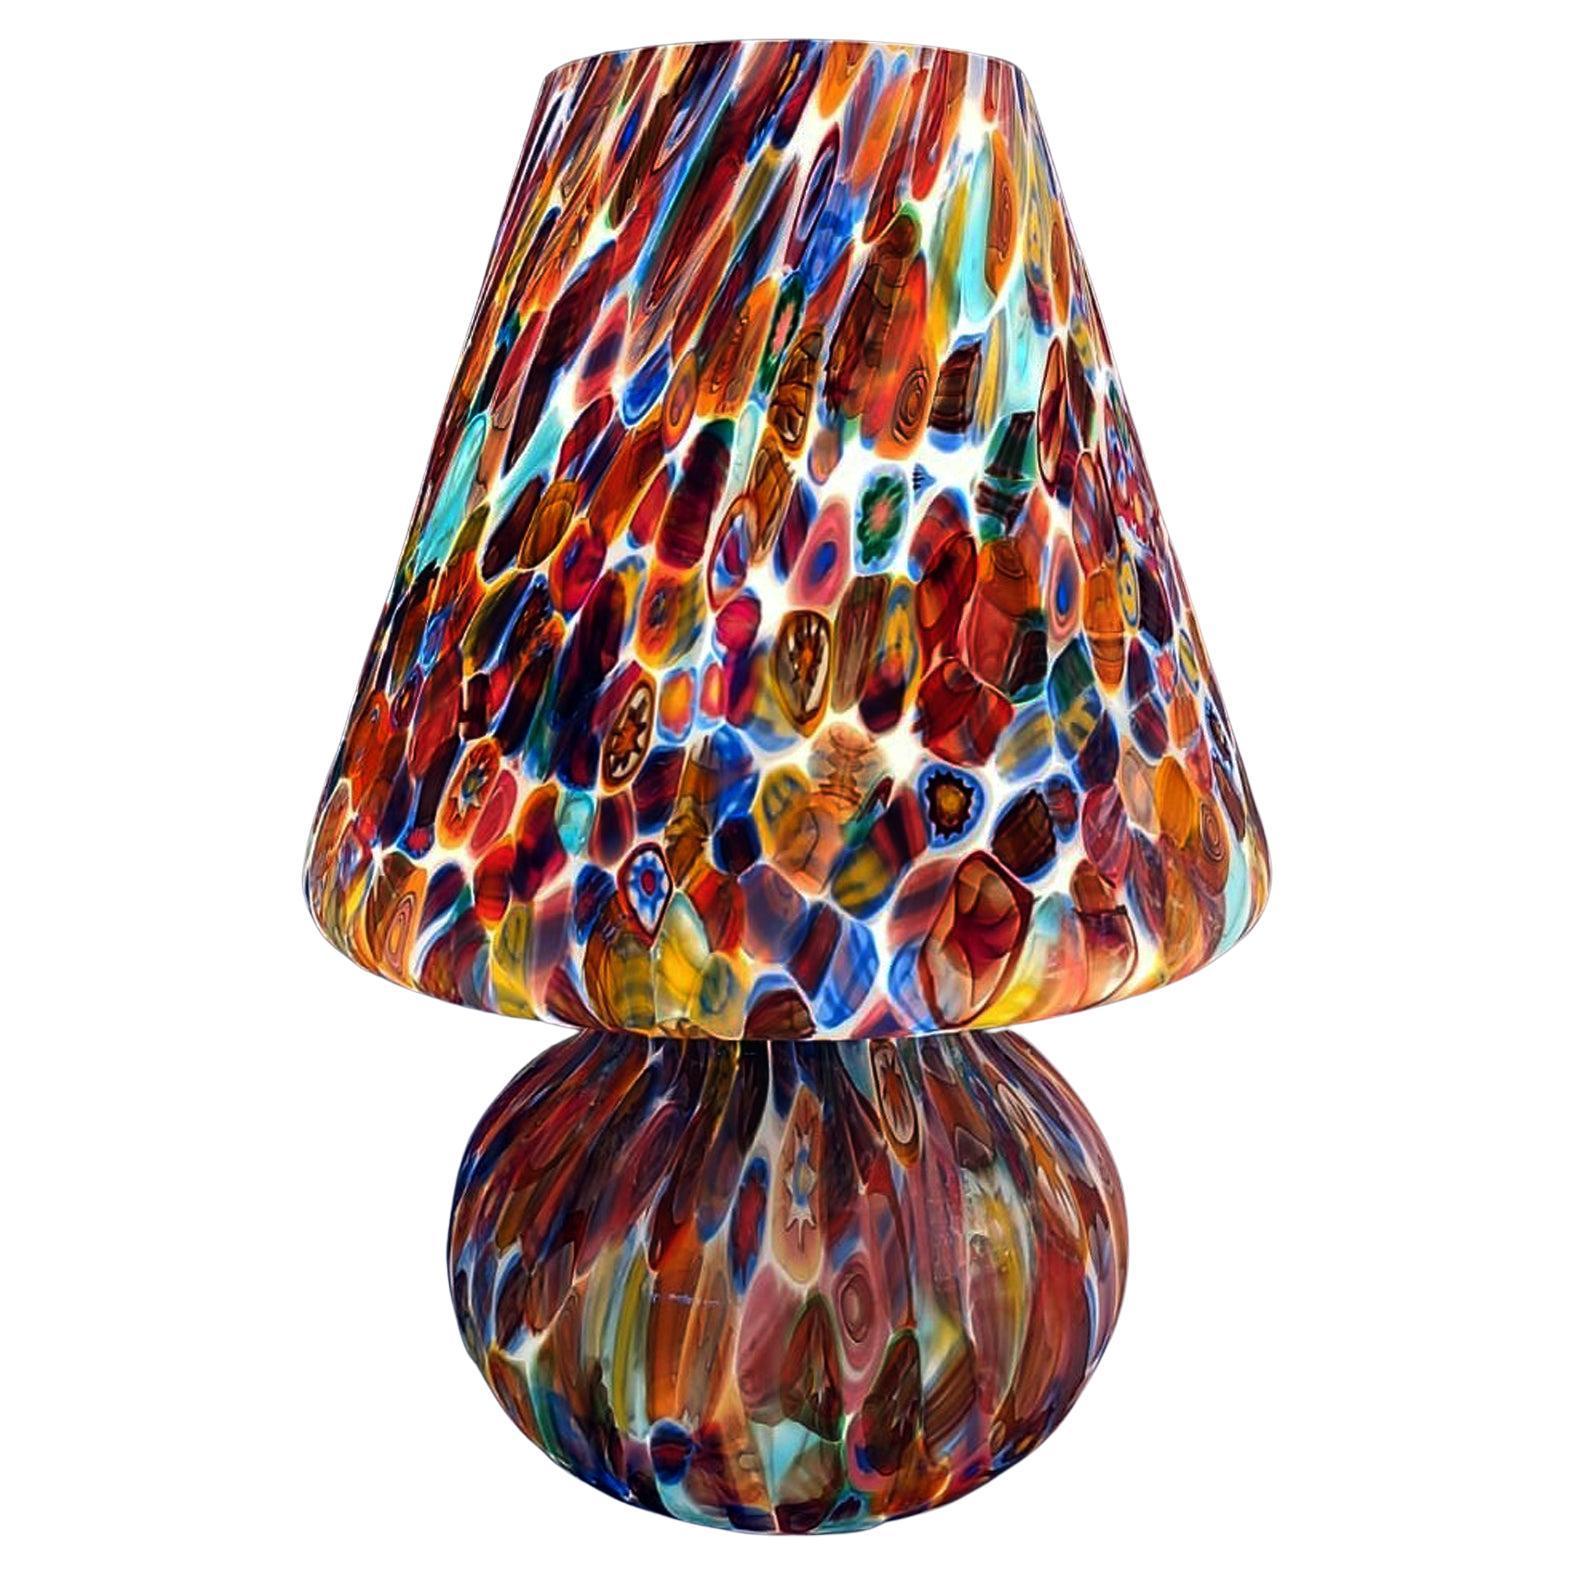 Contemporary Pair of Big Hancrafted Murano Table Lamps Murrine Millefiori Decor, Italy 2000's For Sale